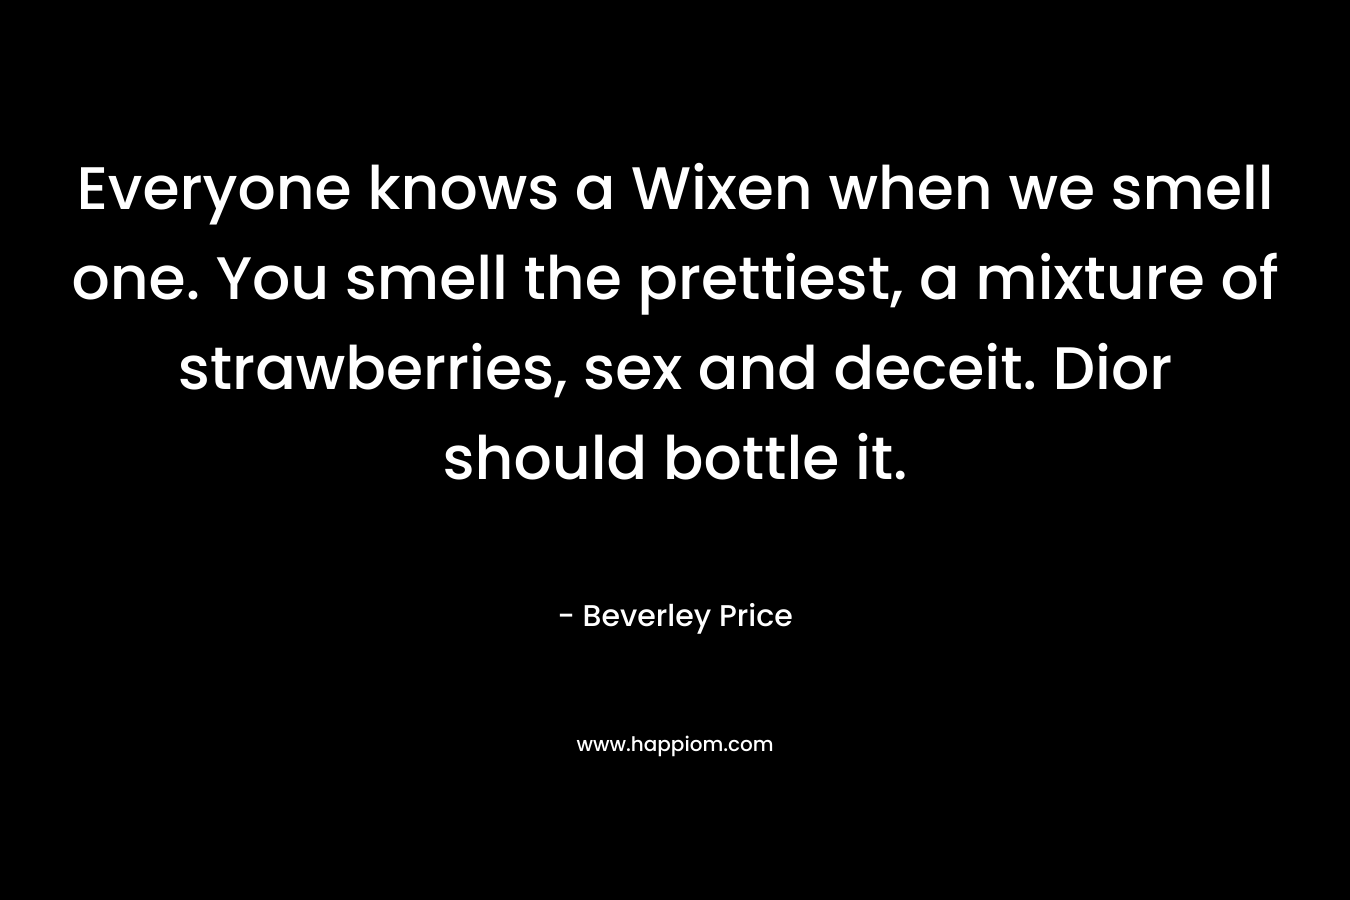 Everyone knows a Wixen when we smell one. You smell the prettiest, a mixture of strawberries, sex and deceit. Dior should bottle it. – Beverley Price